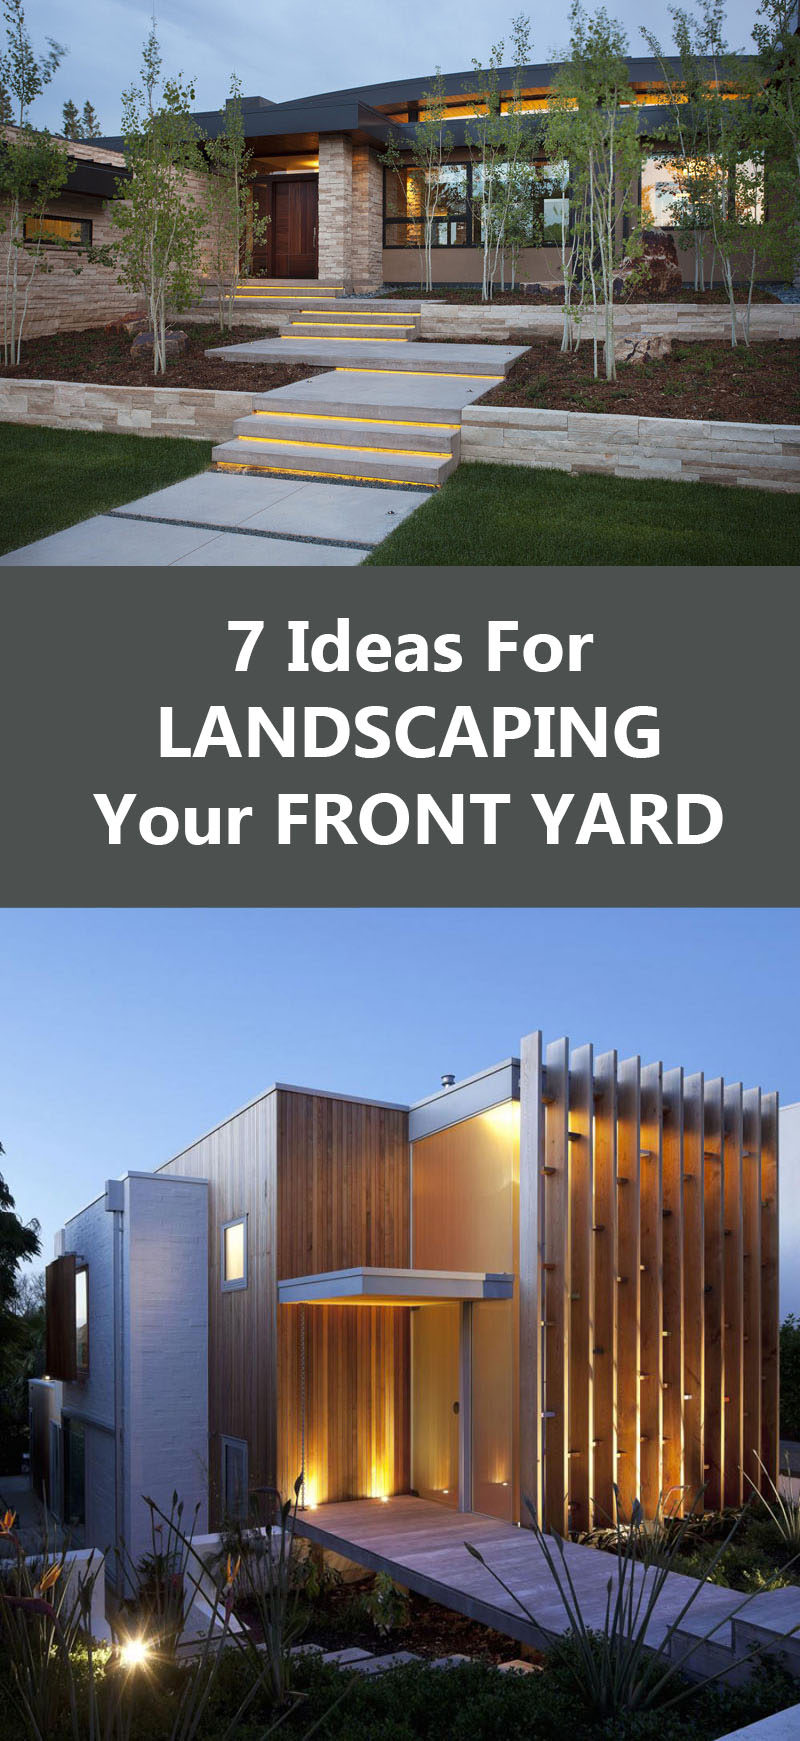 7 Landscaping Ideas For Your Front Yard